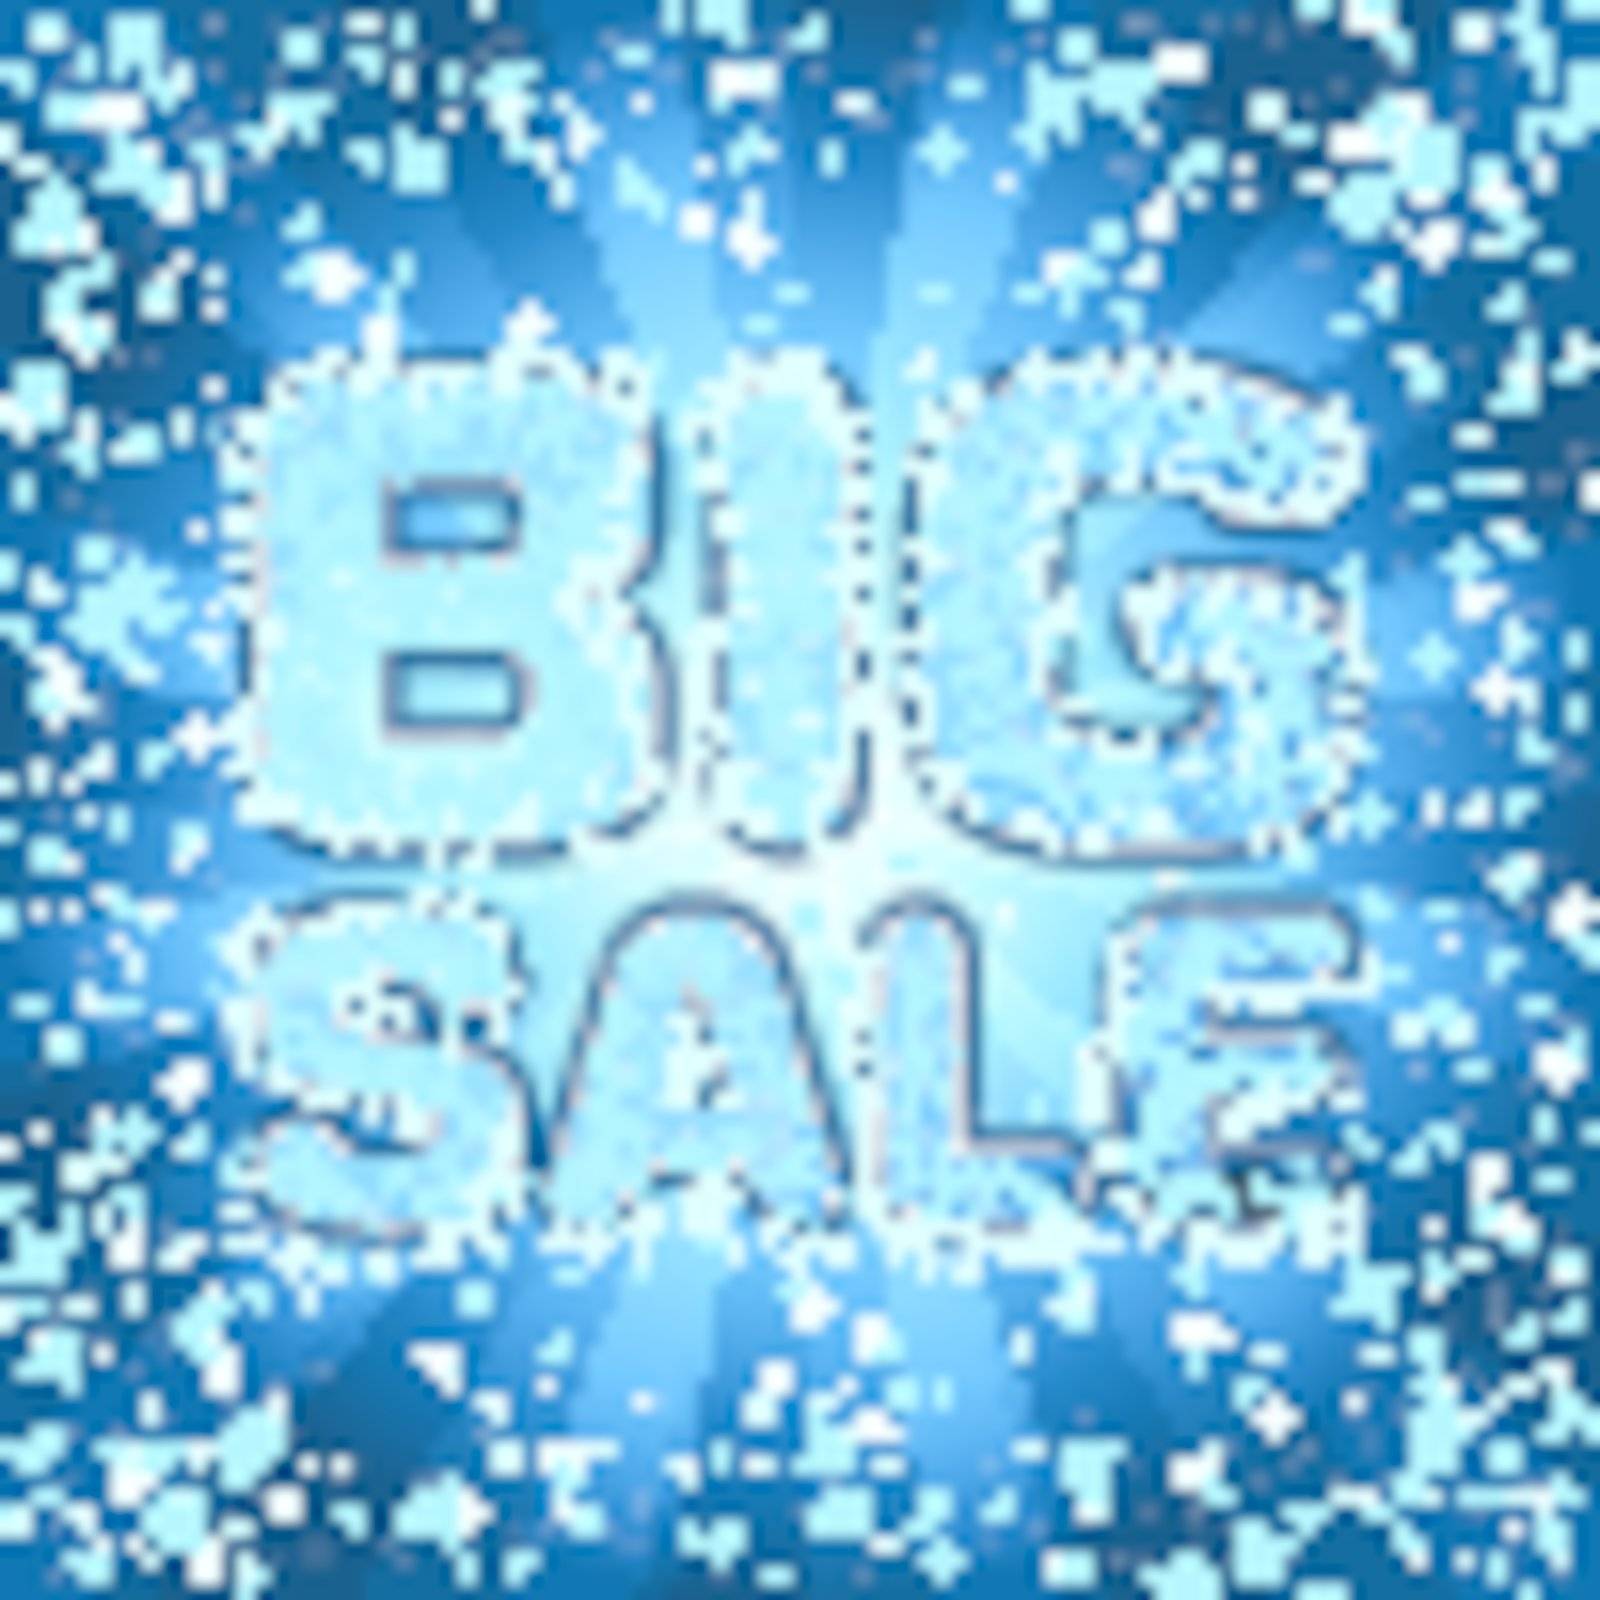 Big sale message. EPS 8 vector file included